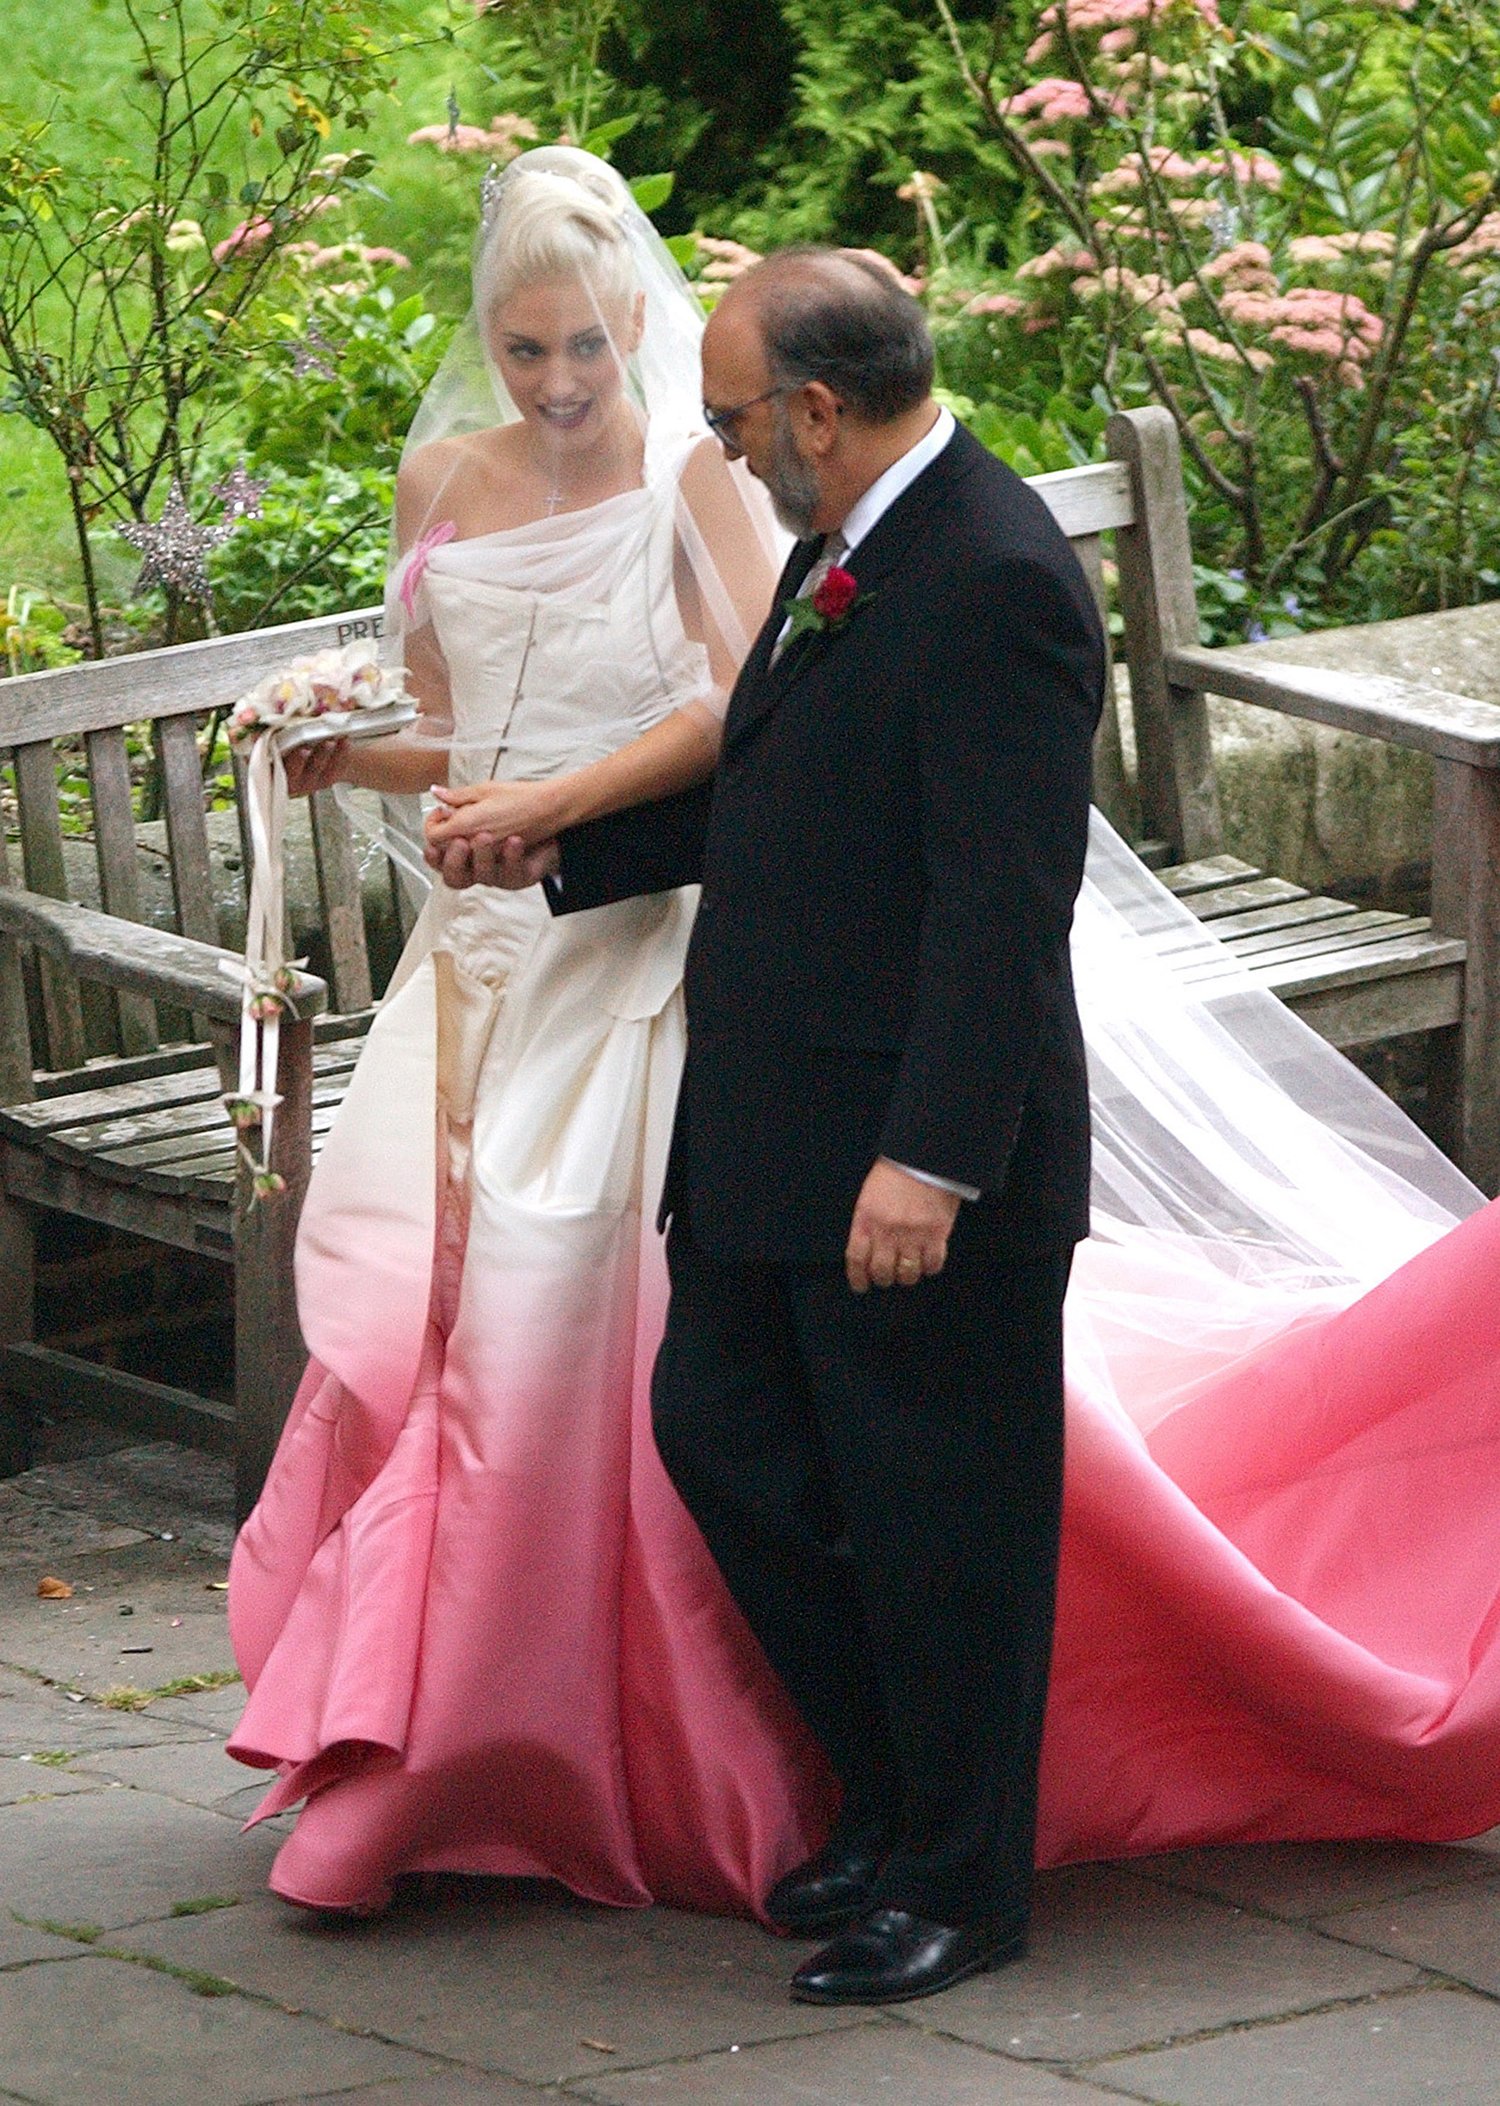 Gwen Stefani holds hands with her father during her wedding ceremony with Gavin Rossdale in 2002..